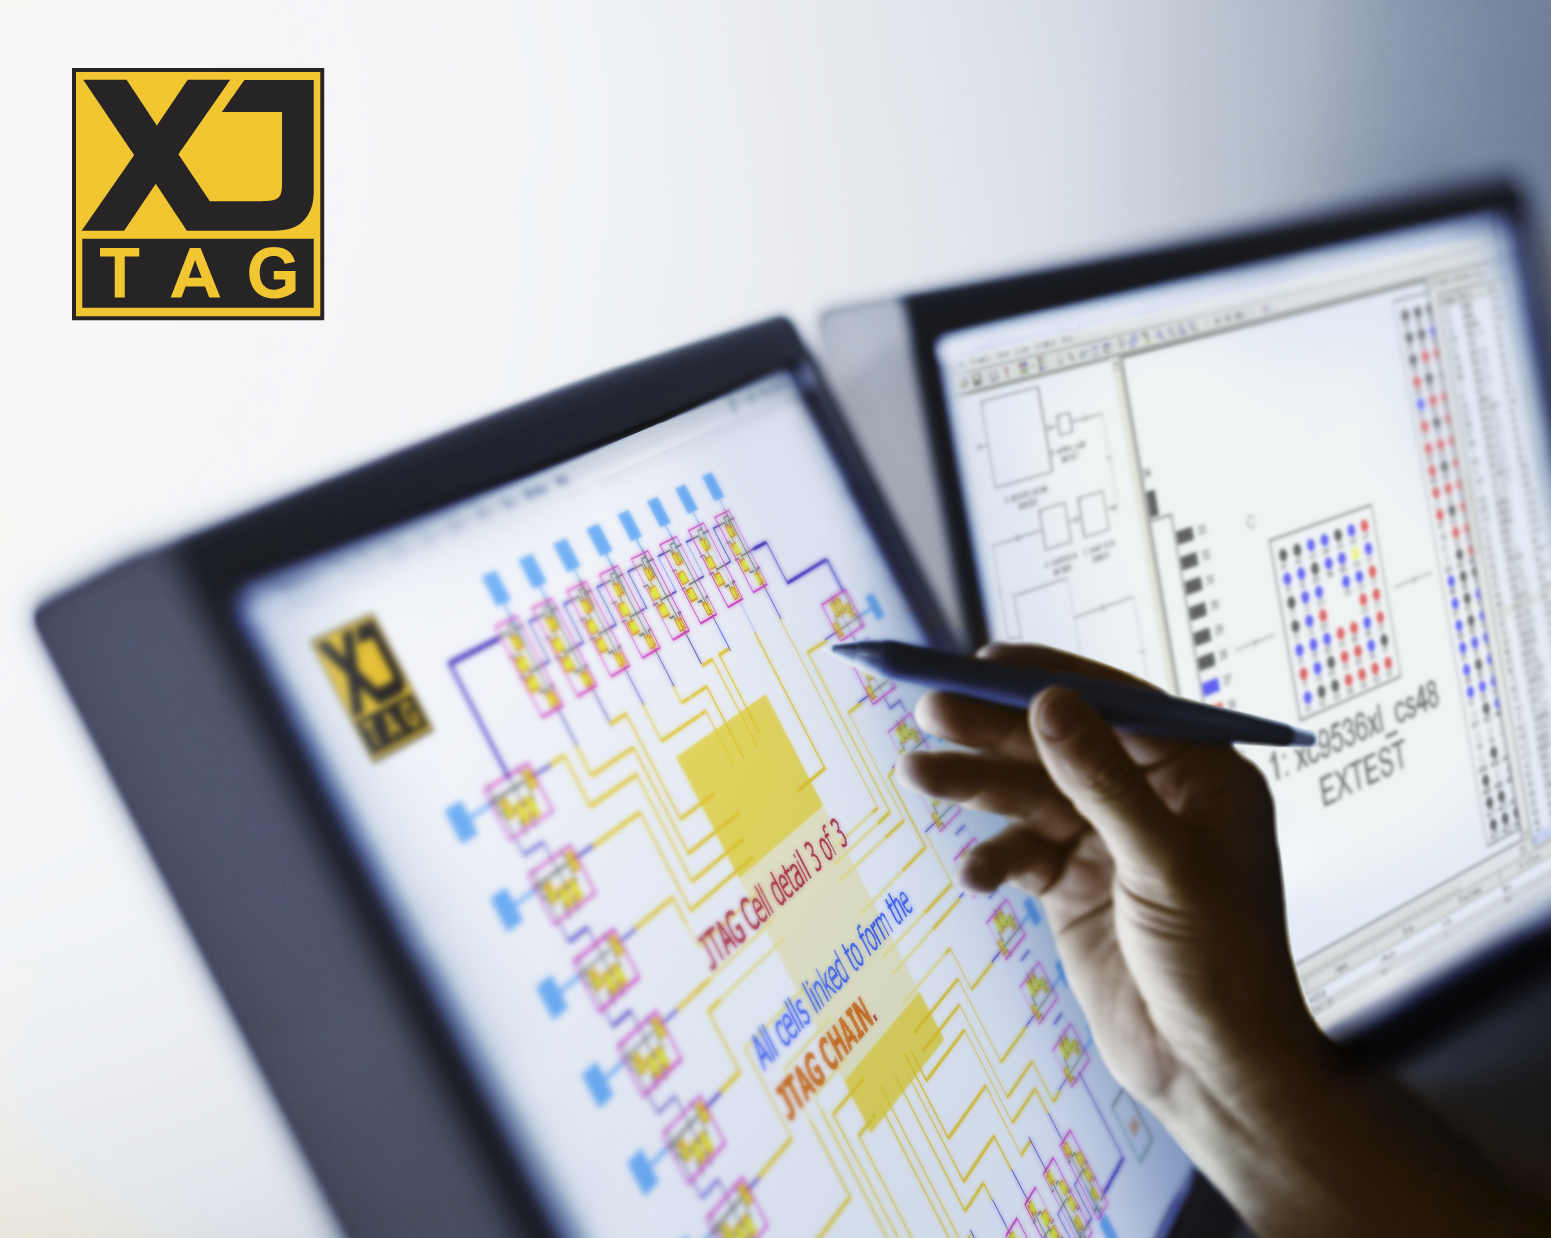 Free hands-on boundary scan workshops at XJTAG